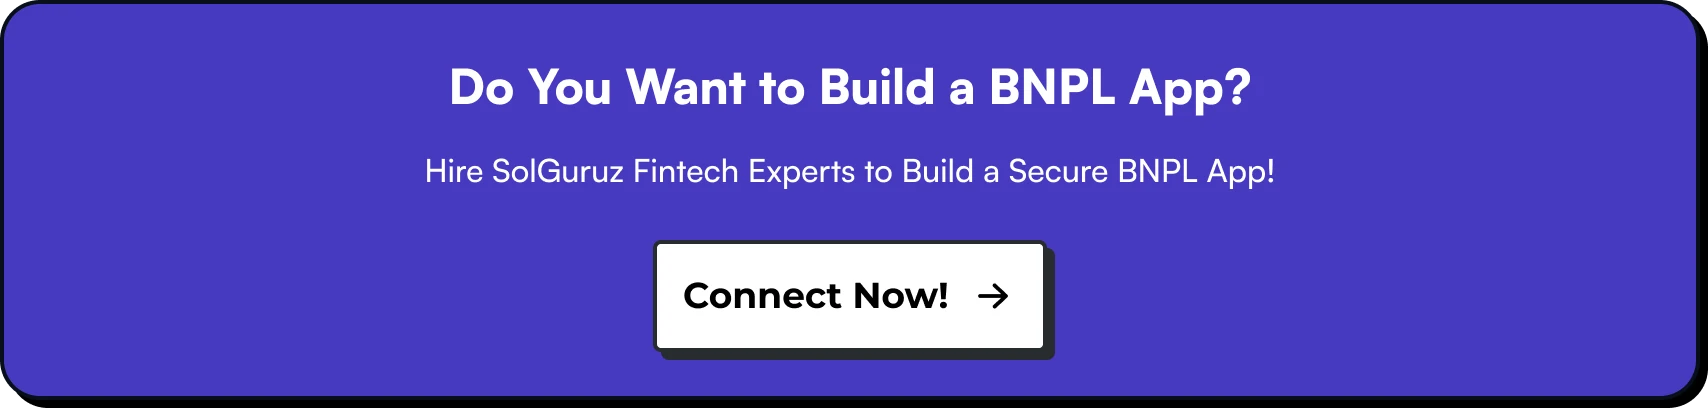 Do You Want to Build a BNPL (Buy Now, Pay Later) App